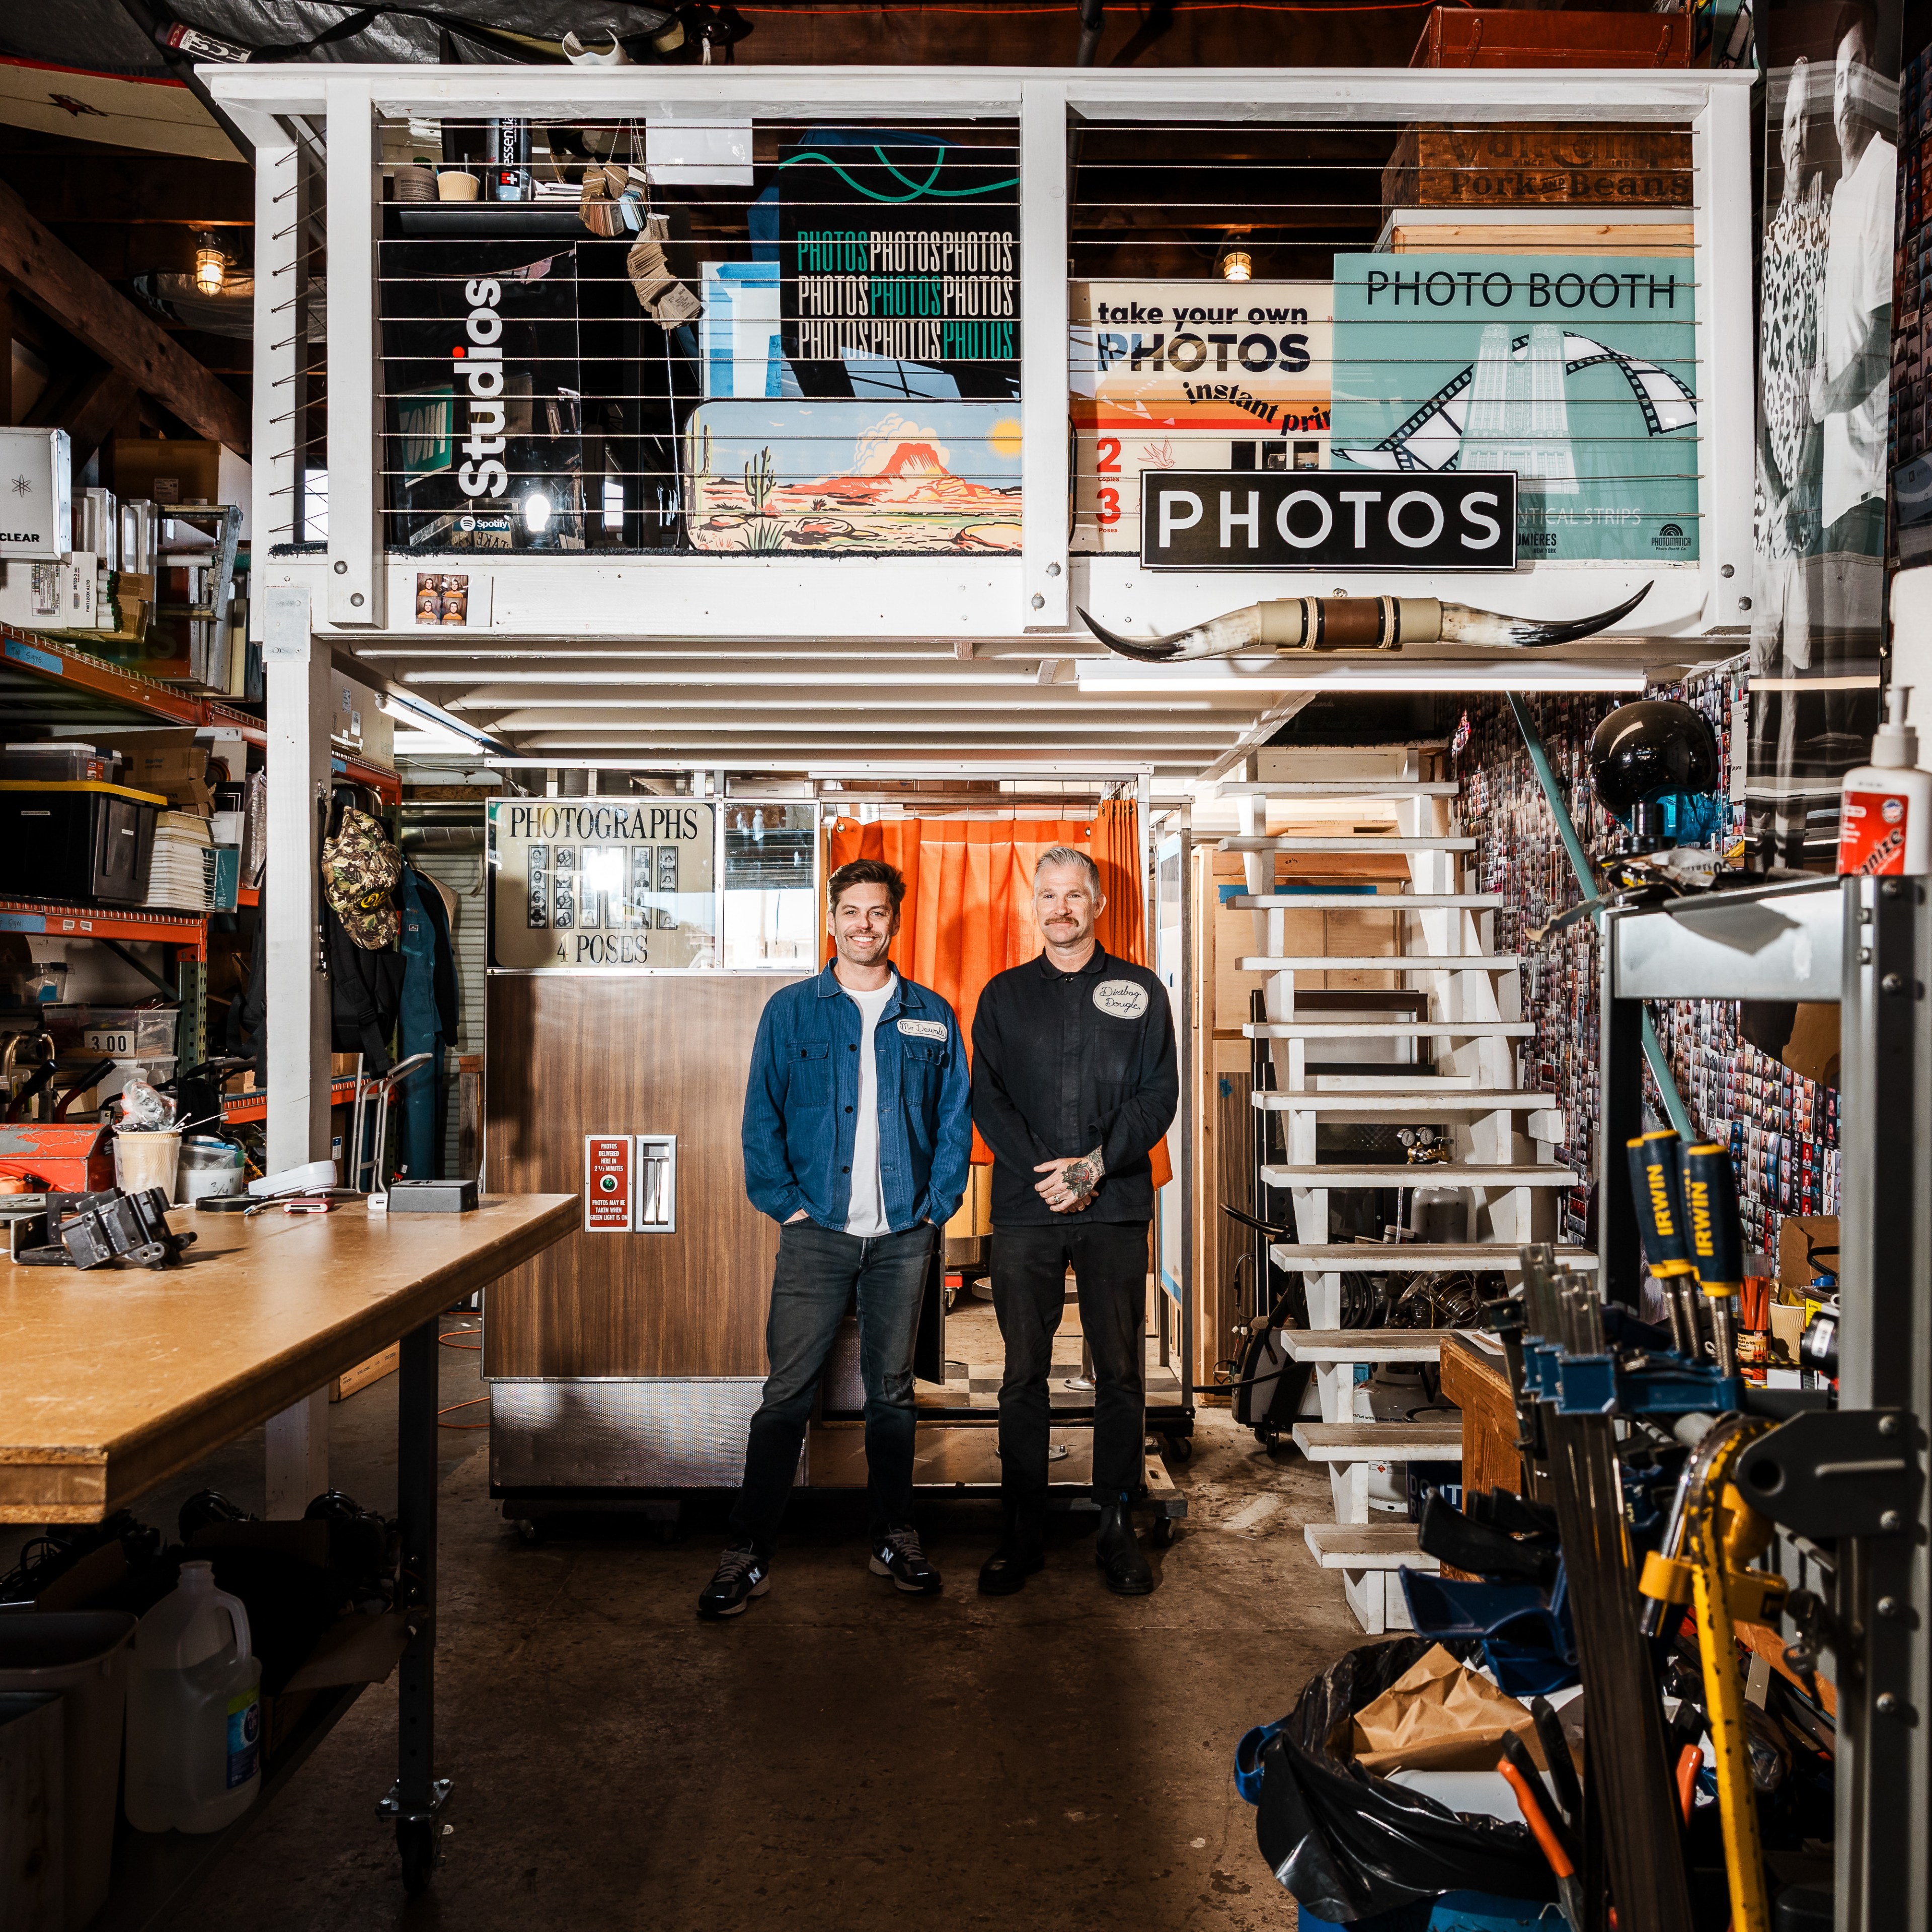 Two men stand in a cluttered workshop with a photo booth, surrounded by tools, equipment, and colorful signs advertising photos on a mezzanine above.